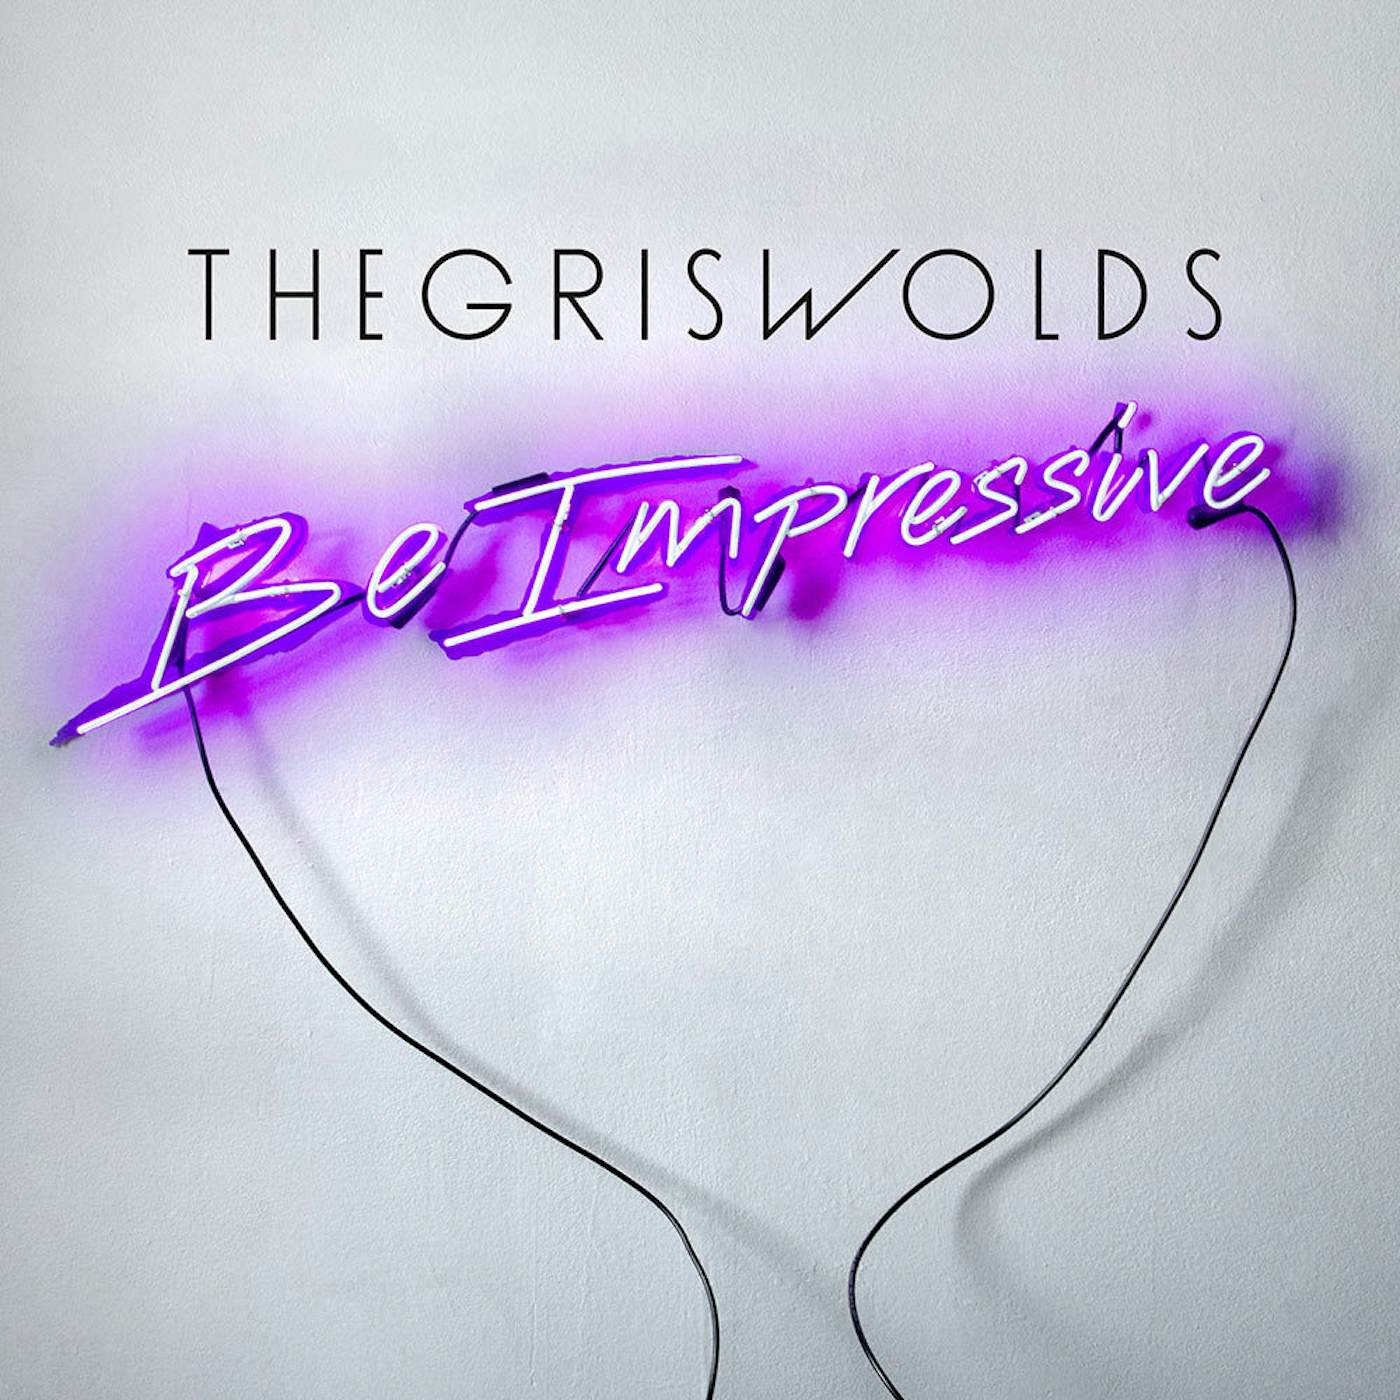 The Griswolds - Be Impressive CD